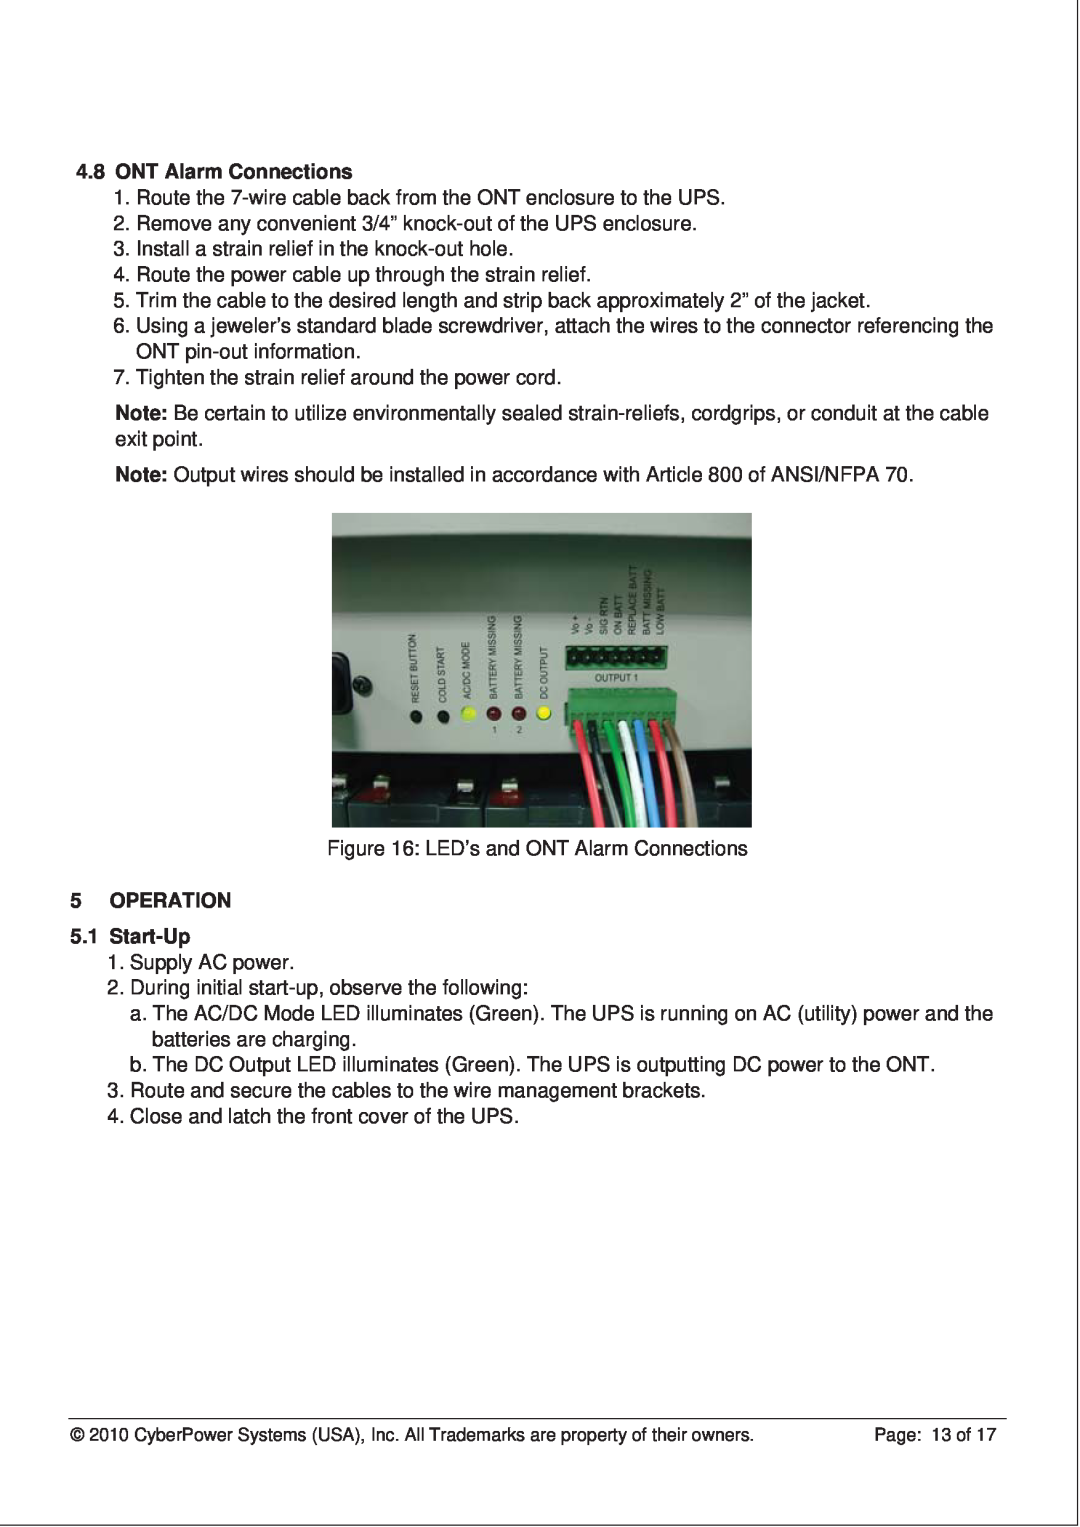 CyberPower CS150U48V3 operation manual ONT Alarm Connections, OPERATION 5.1 Start-Up 